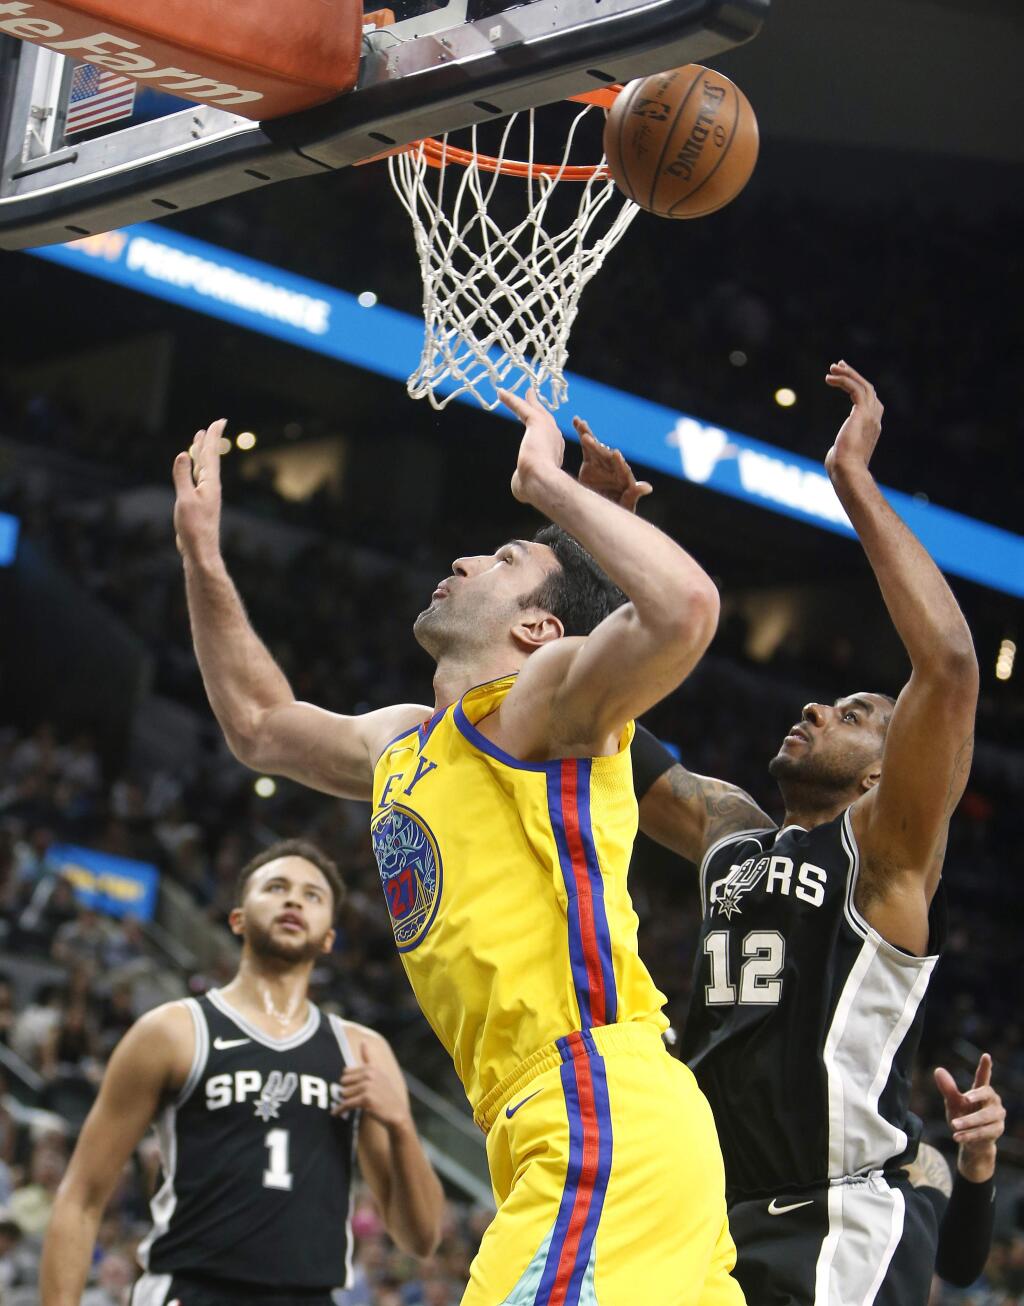 Golden State Warriors center Zaza Pachulia (27) has his shot blocked by San Antonio Spurs forward LaMarcus Aldridge (12) during the first half of an NBA game, Monday, March 19, 2018, in San Antonio. (AP Photo/Ronald Cortes)